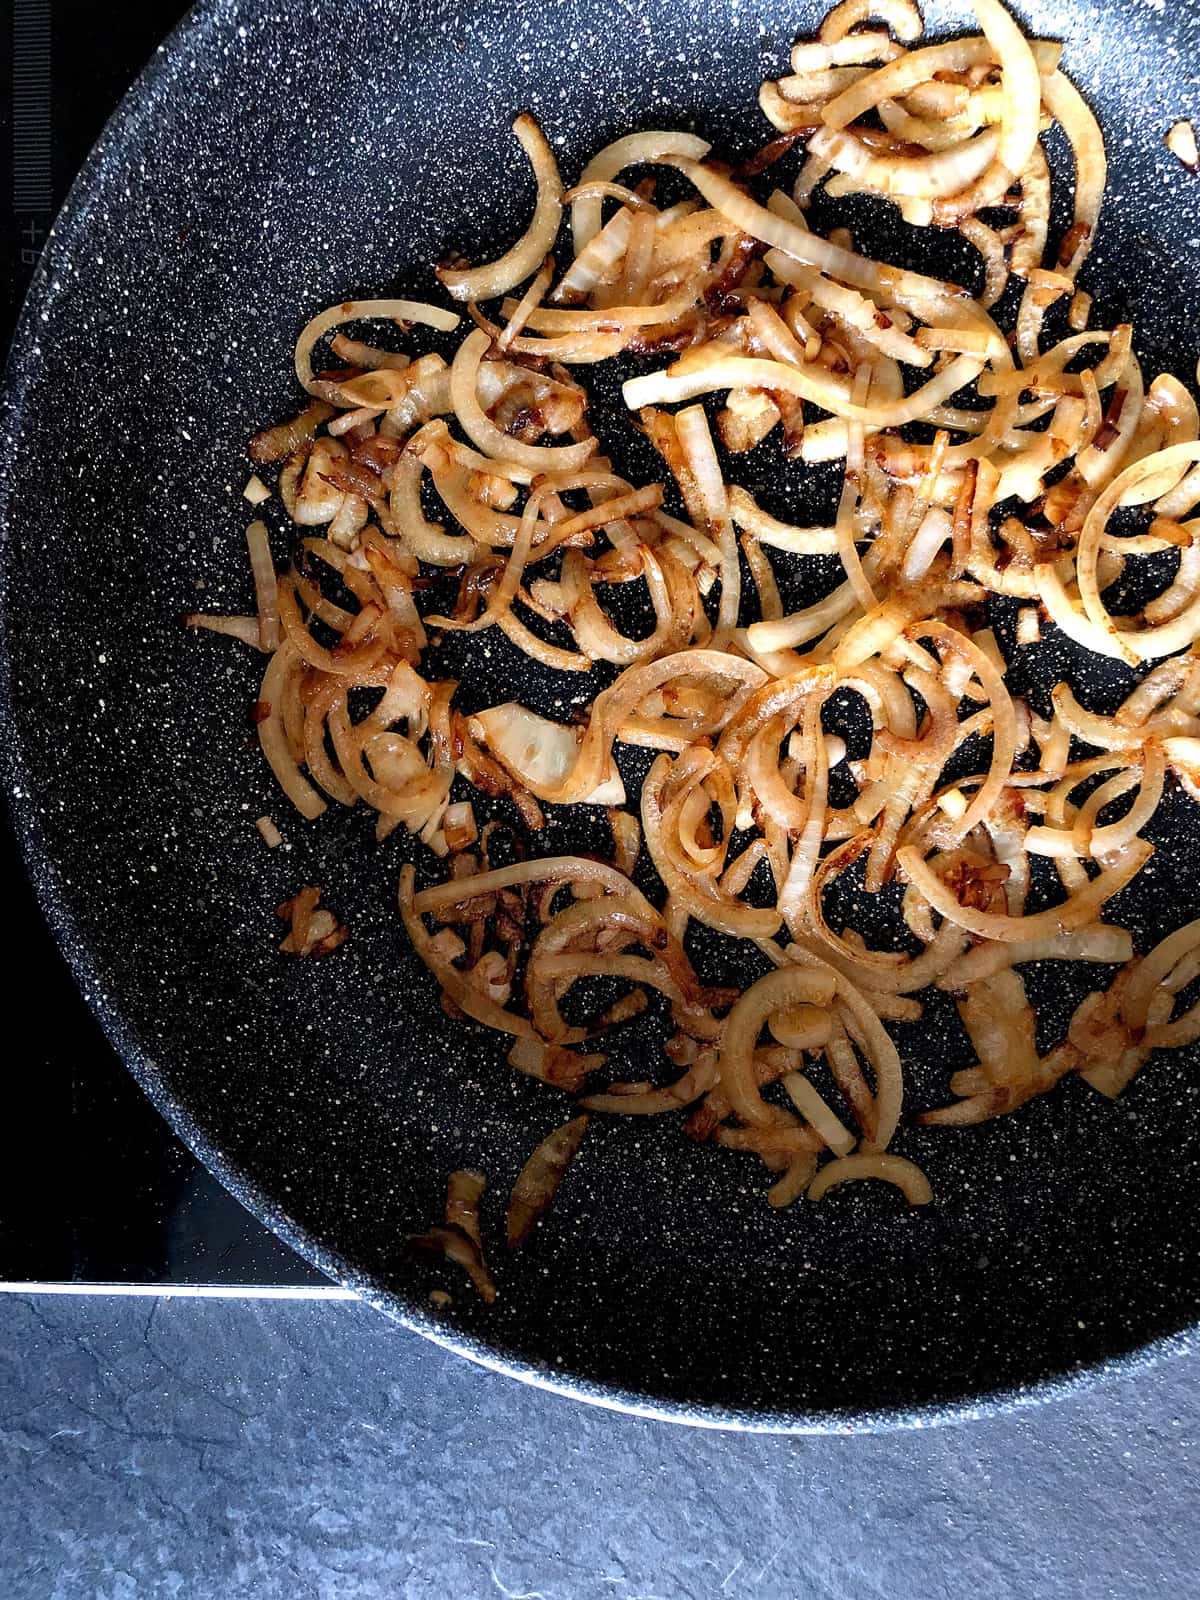 Browning onion in a pan